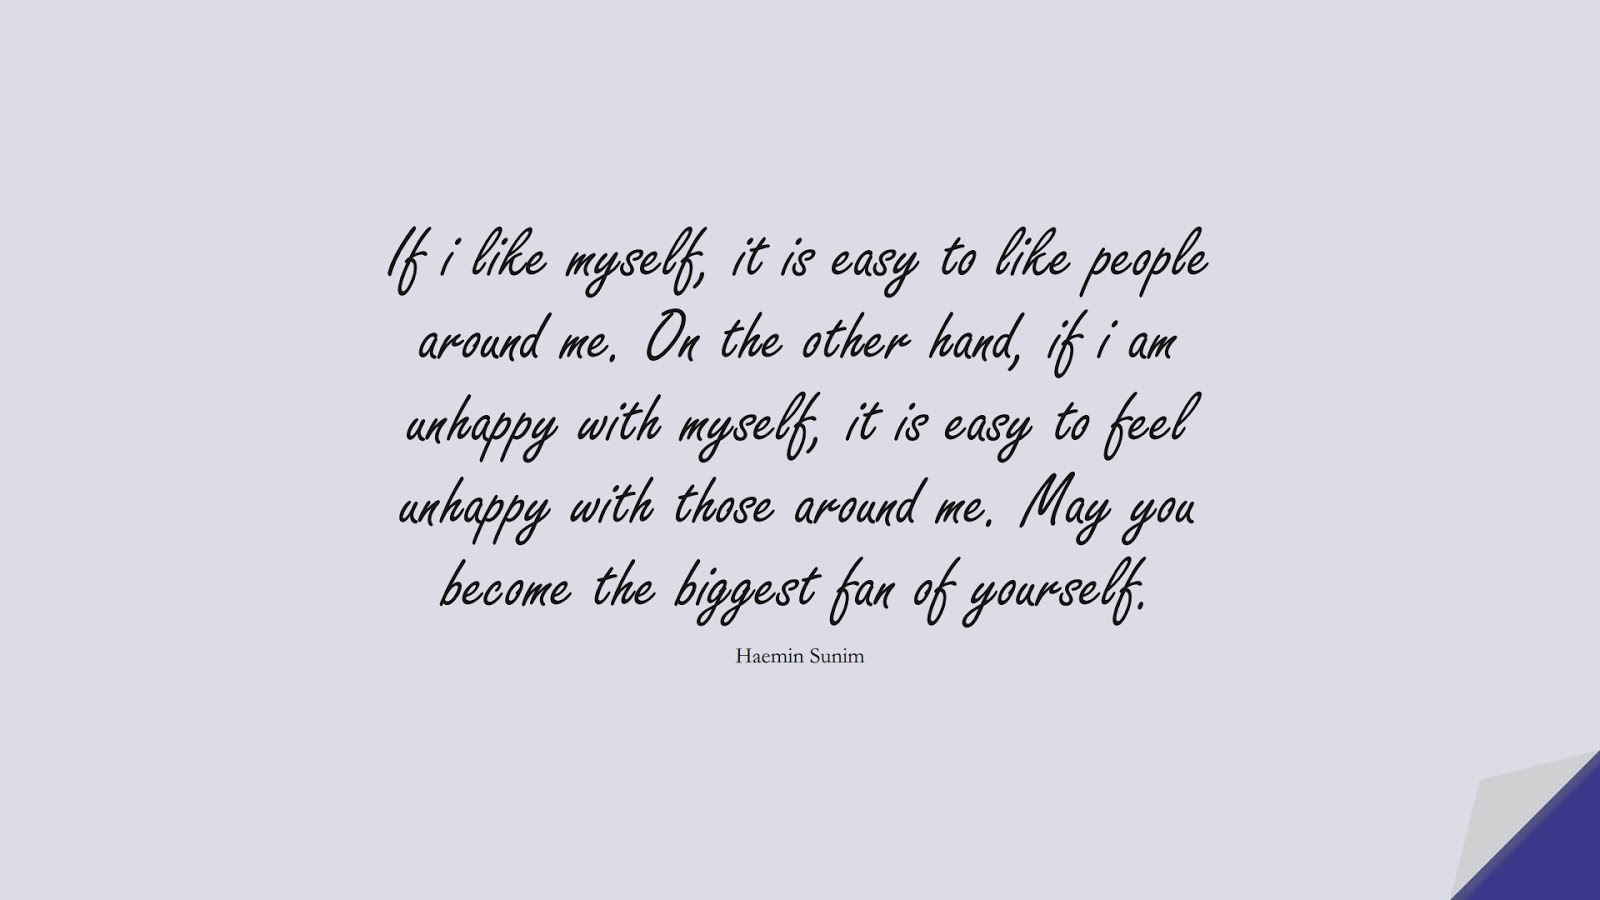 If i like myself, it is easy to like people around me. On the other hand, if i am unhappy with myself, it is easy to feel unhappy with those around me. May you become the biggest fan of yourself. (Haemin Sunim);  #LoveYourselfQuotes